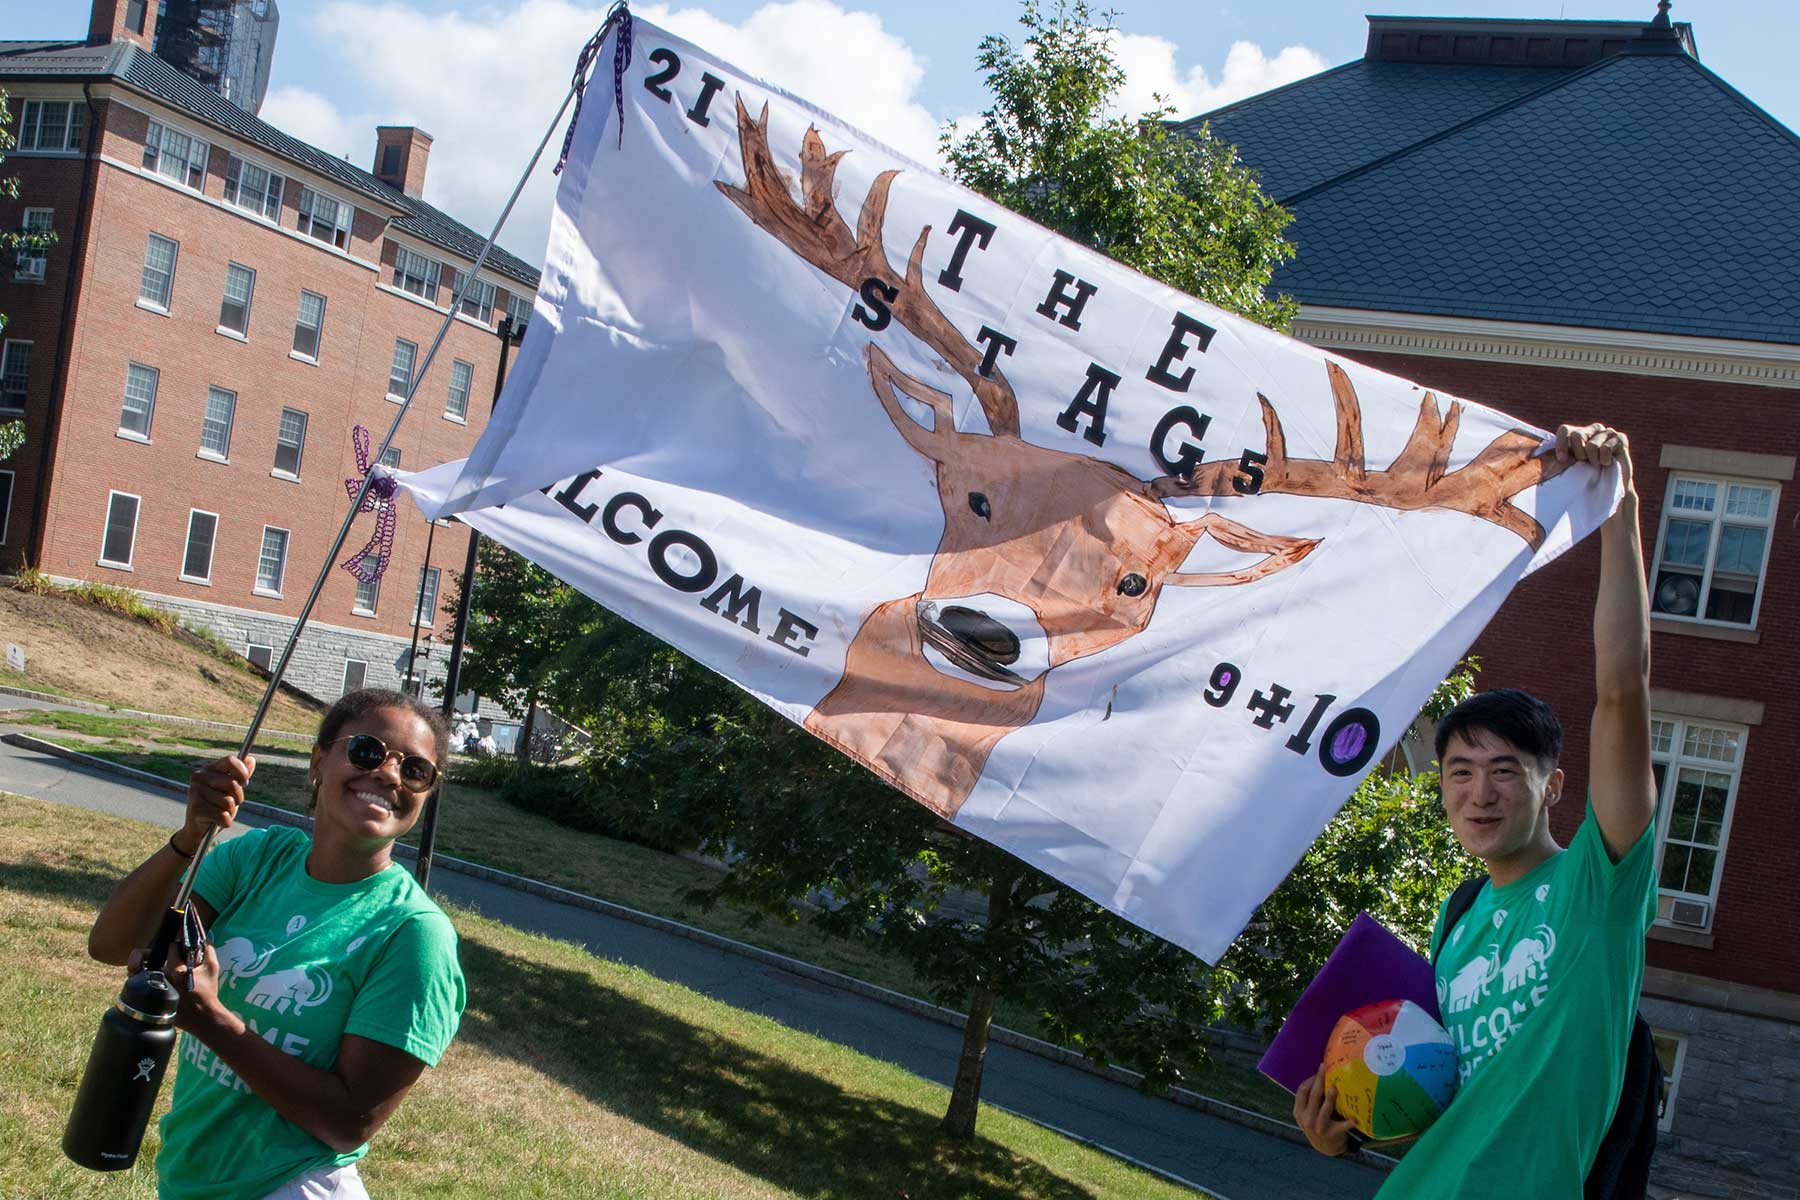 Two students hold up large banners on move-in day at Amherst College.